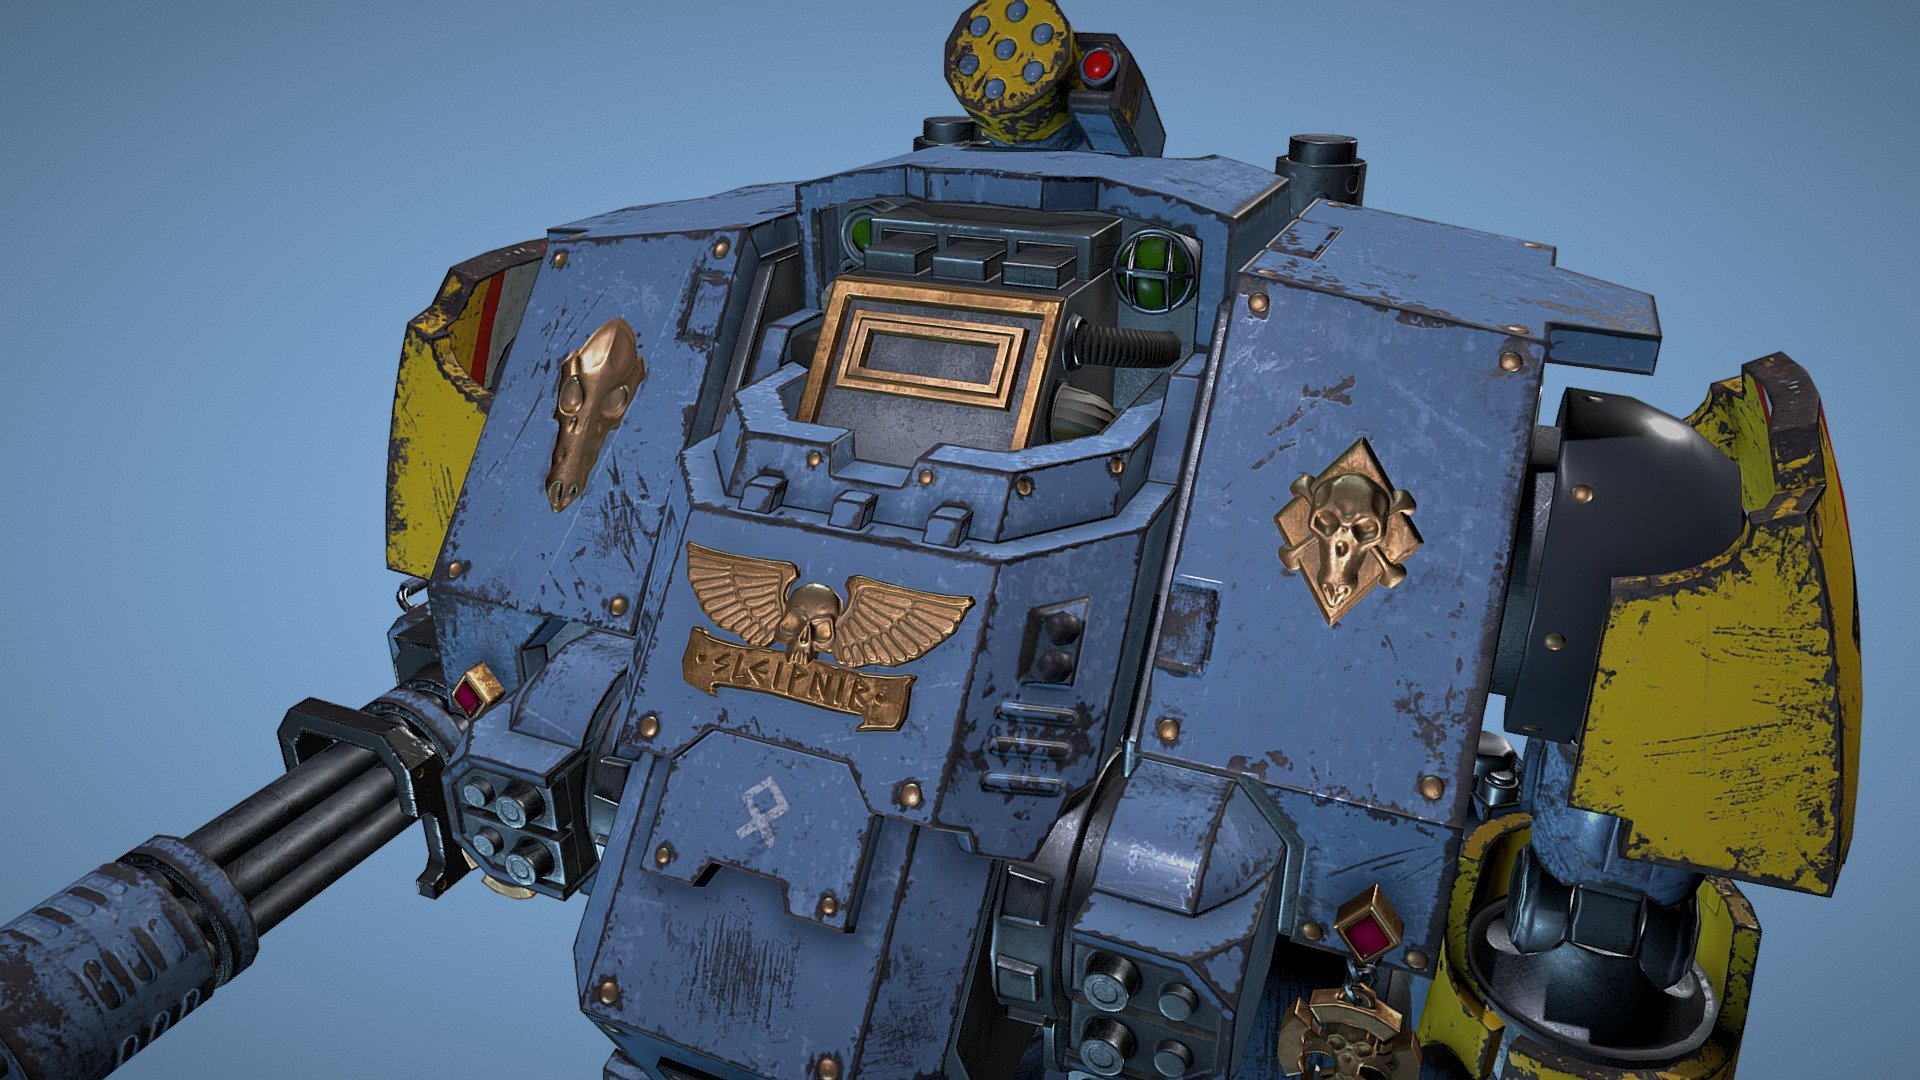 New textures;) Hello ZBrush - Dreadnought - 3D model by meenkatrin 3d model